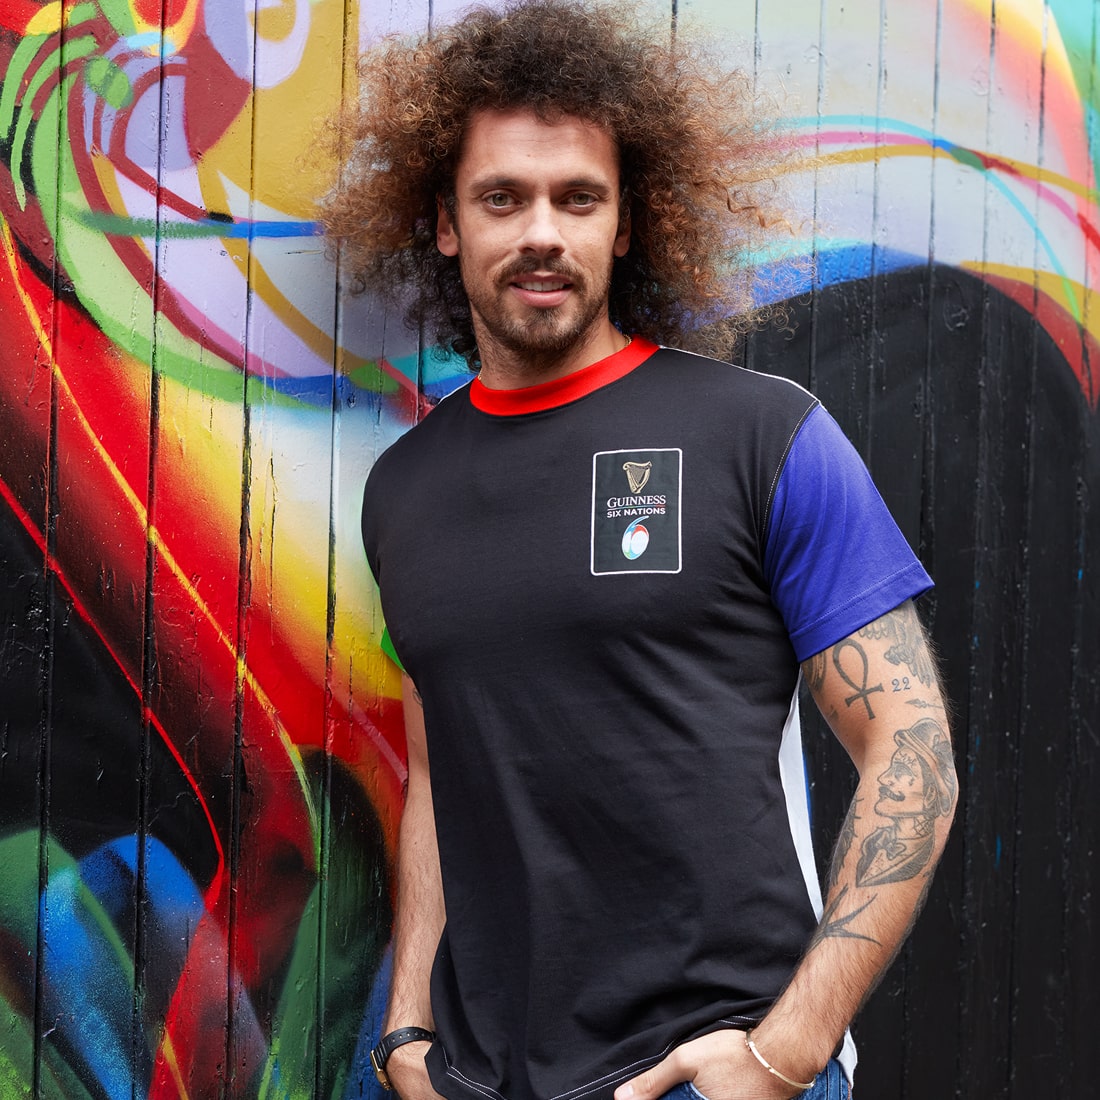 A man with curly hair wearing a Guinness UK Six Nations Premium Colour Block T-Shirt, standing in front of a graffiti wall.